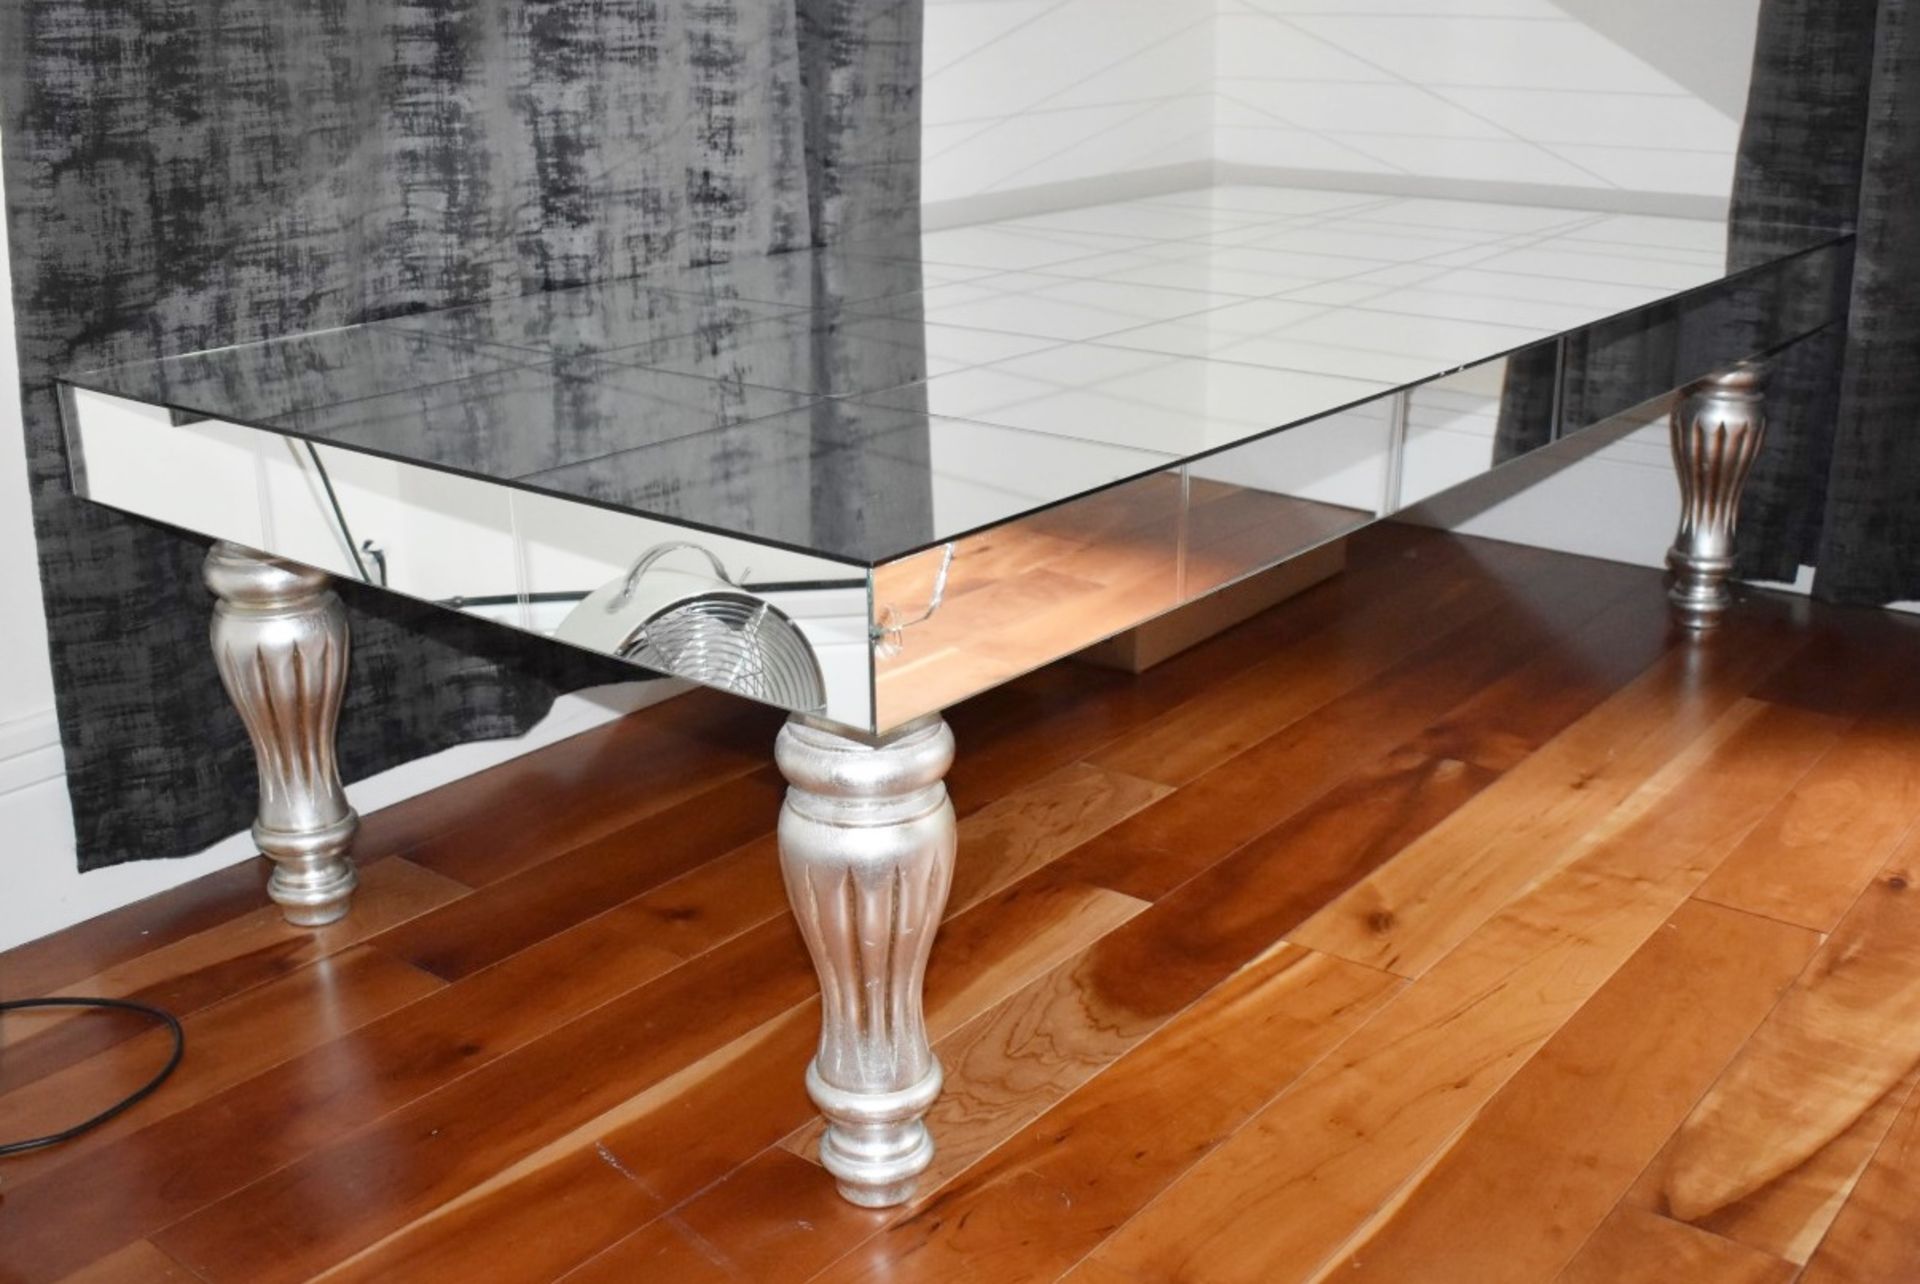 1 x Mirrored Coffee Table With Turned Legs in Silver - Size H50 x W181 x D91 cms - CL546 - Location: